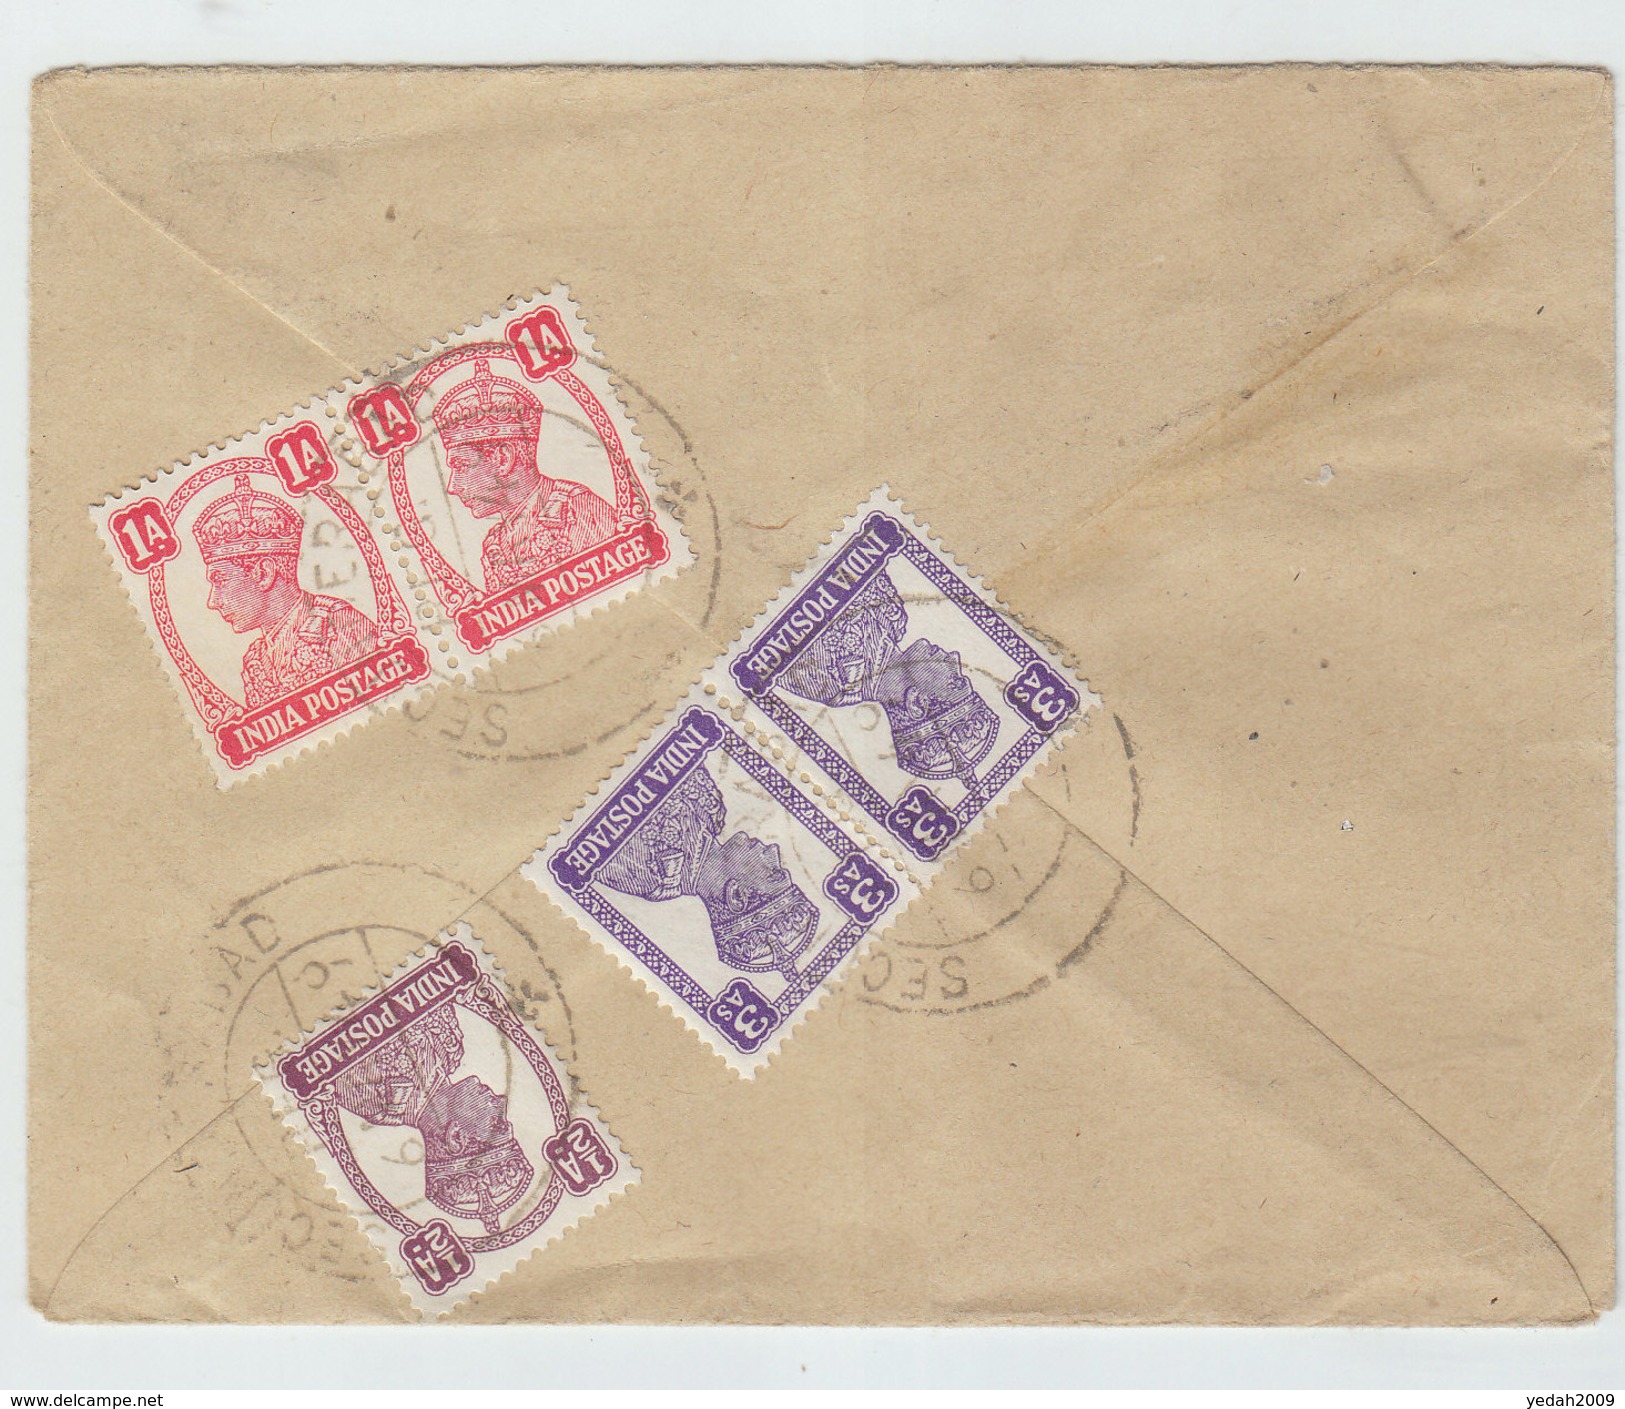 India/Austria SECUNDERABAD AIRMAIL REGISTERED COVER 1949 - Covers & Documents